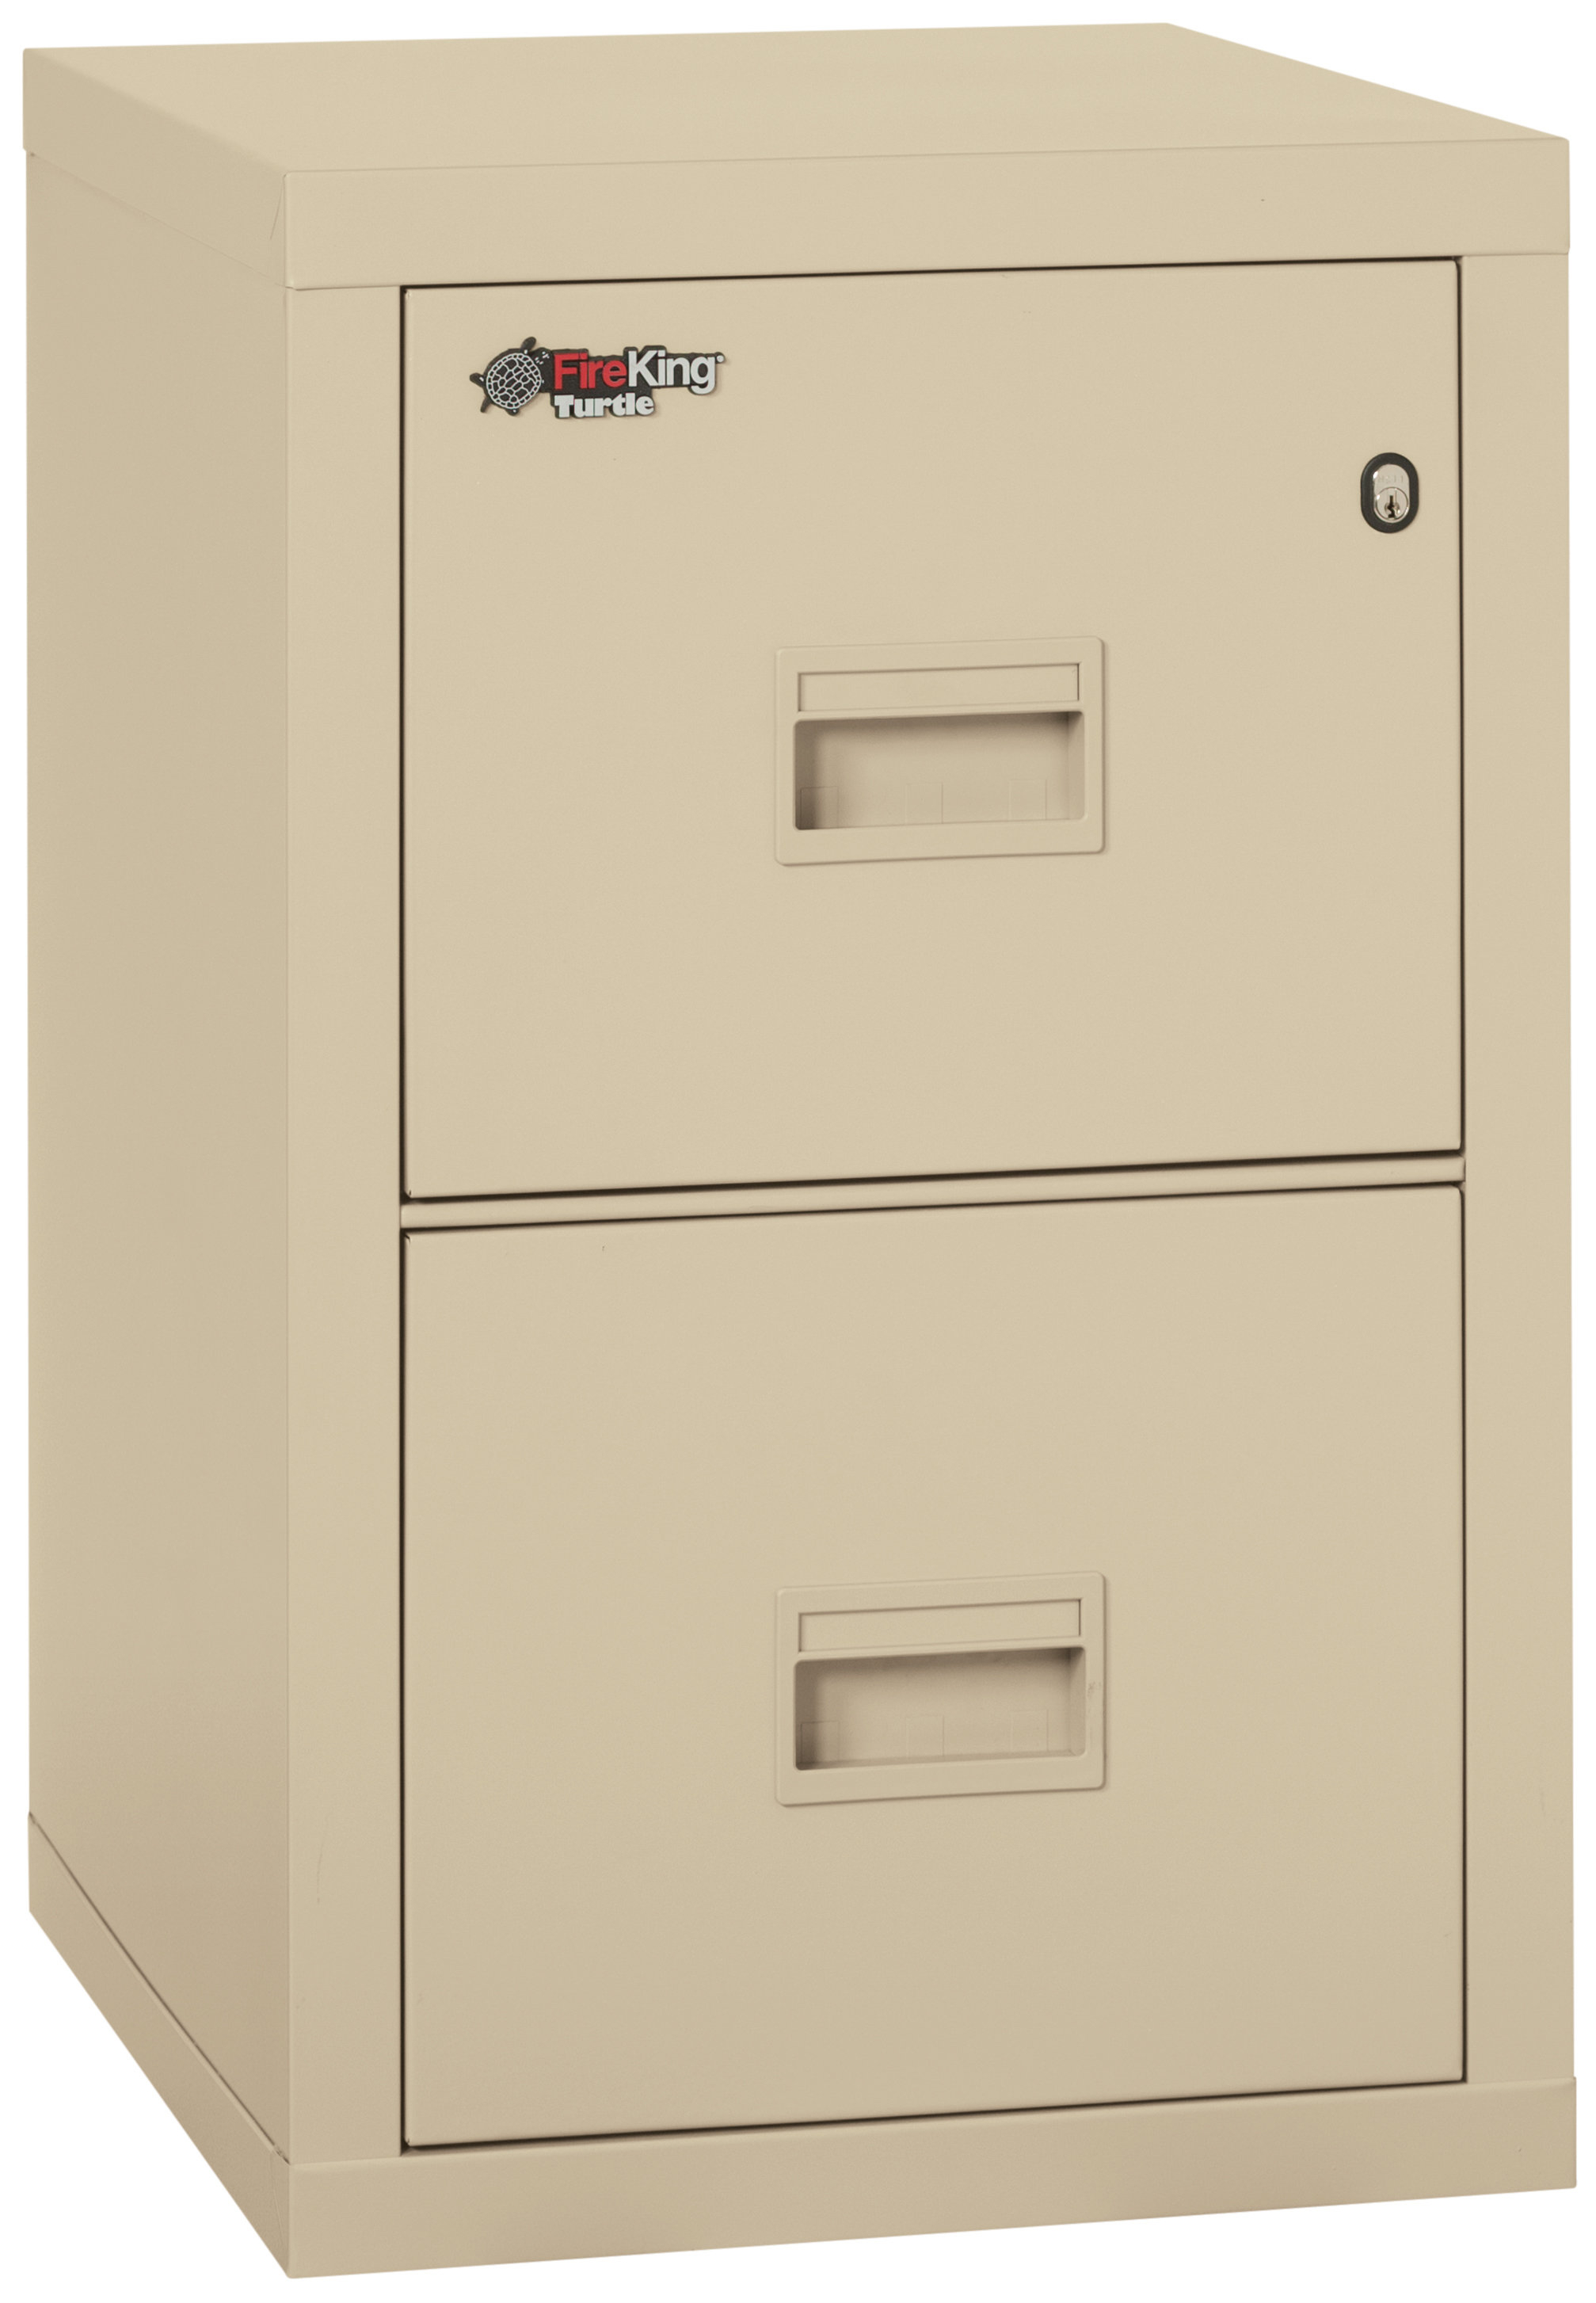 Fireking Turtle Fireproof 2 Drawer Vertical File Cabinet Reviews intended for size 2015 X 2907